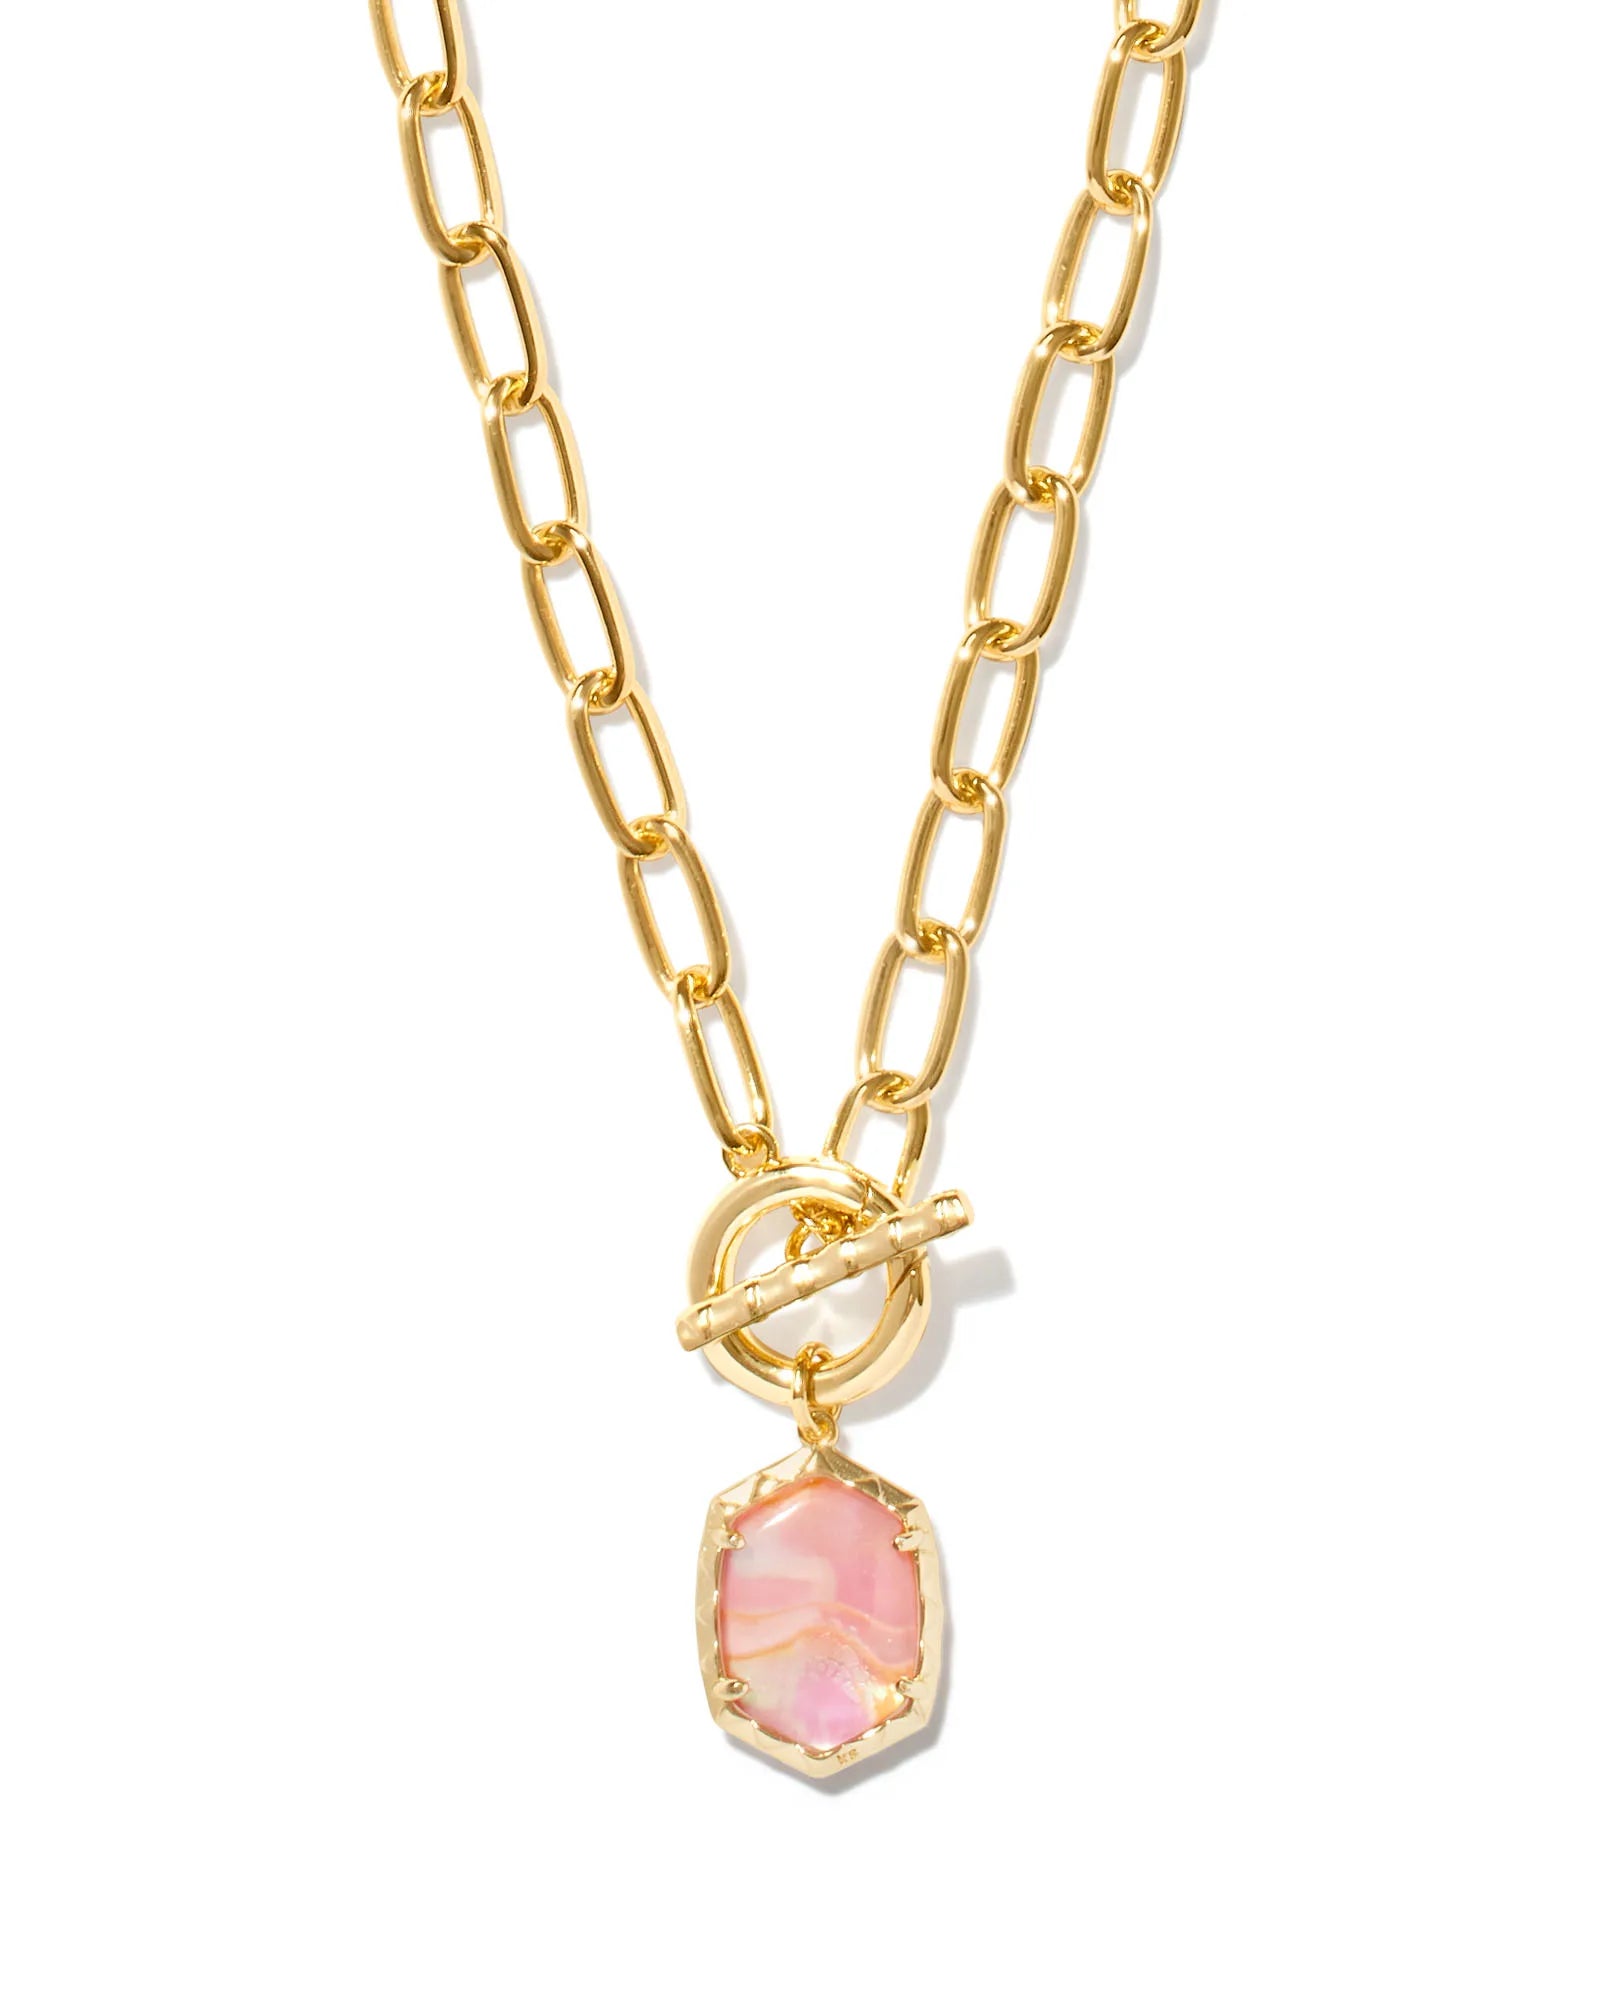 Kendra Scott Kendall Gold Pendant Necklace in Iridescent Orchid Illusi •  Impressions Online Boutique